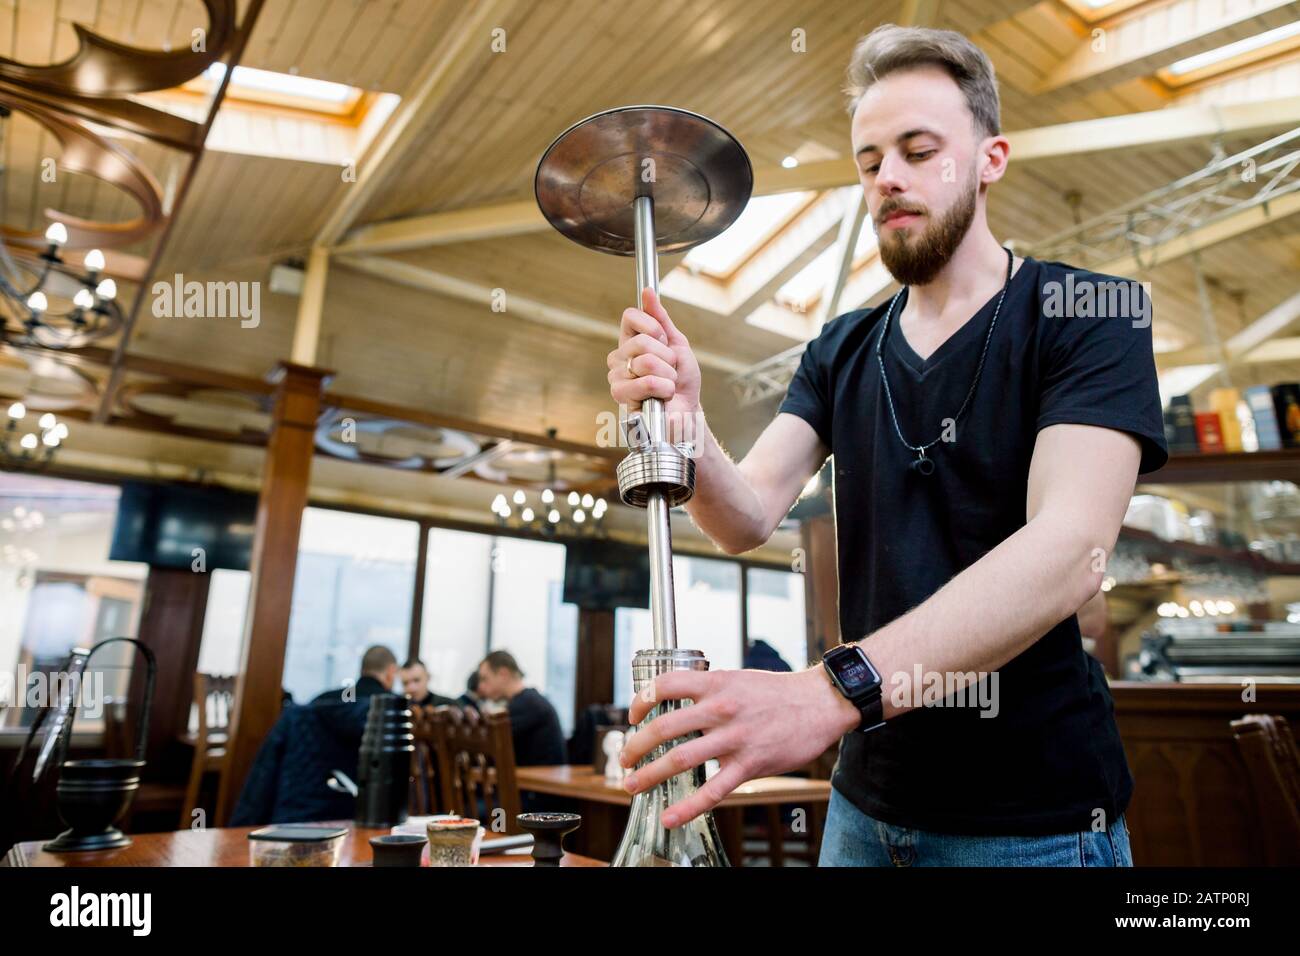 Preparing the shisha, aka nargile or hookah at a restaurant by placing the cup on top Stock Photo